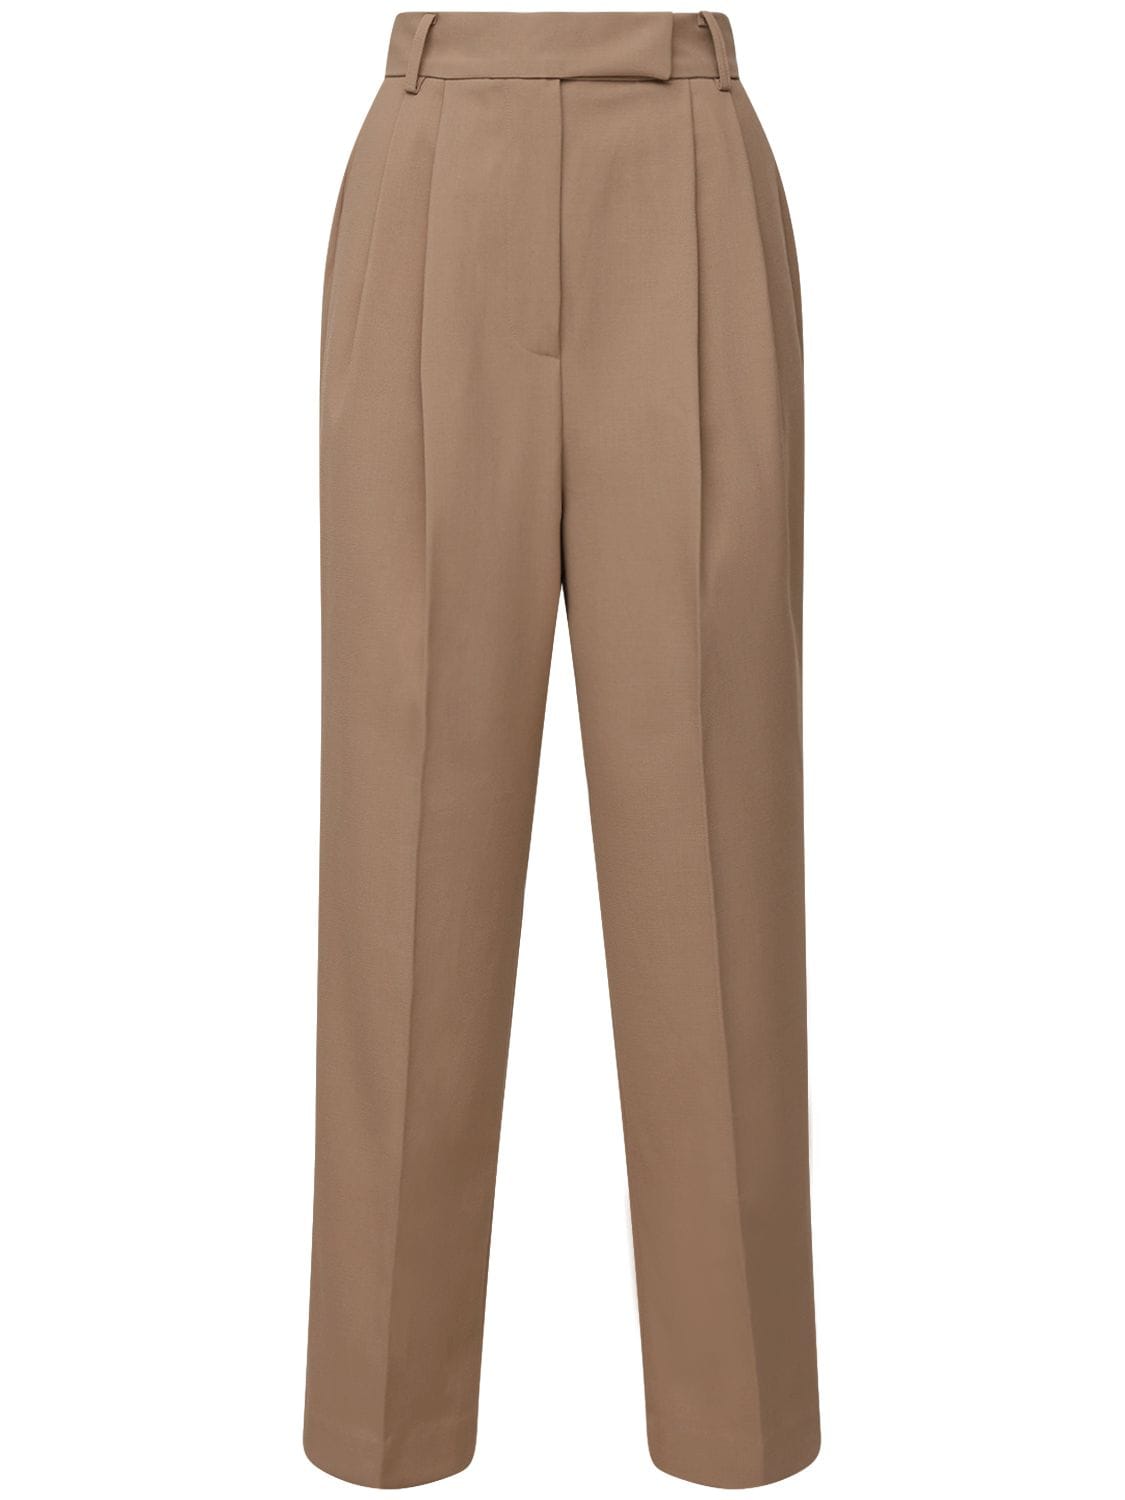 The Frankie Shop Bea Twill Straight Trousers In Beige